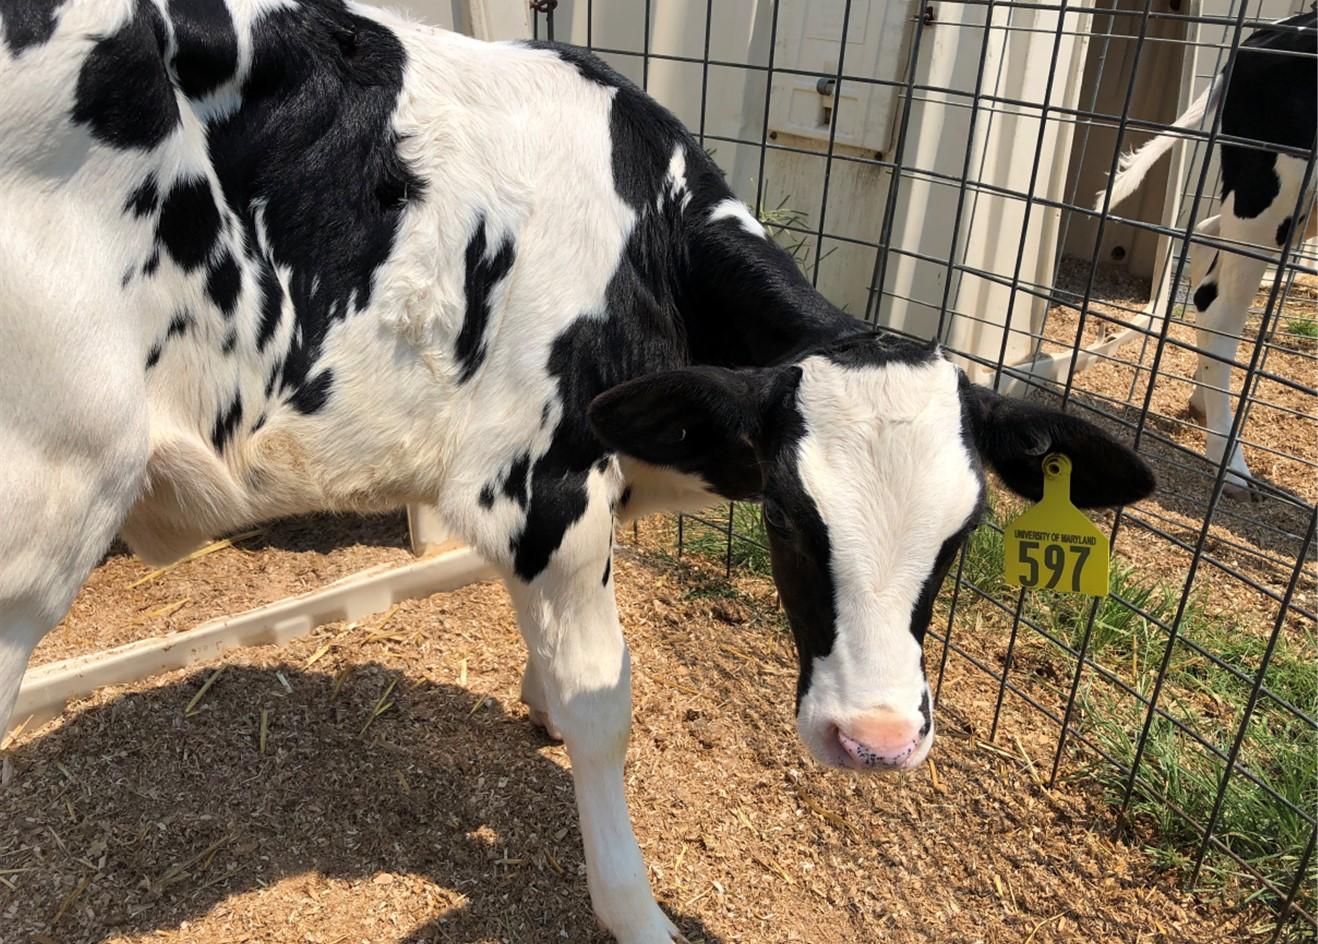 Black and white spotted calf in pen